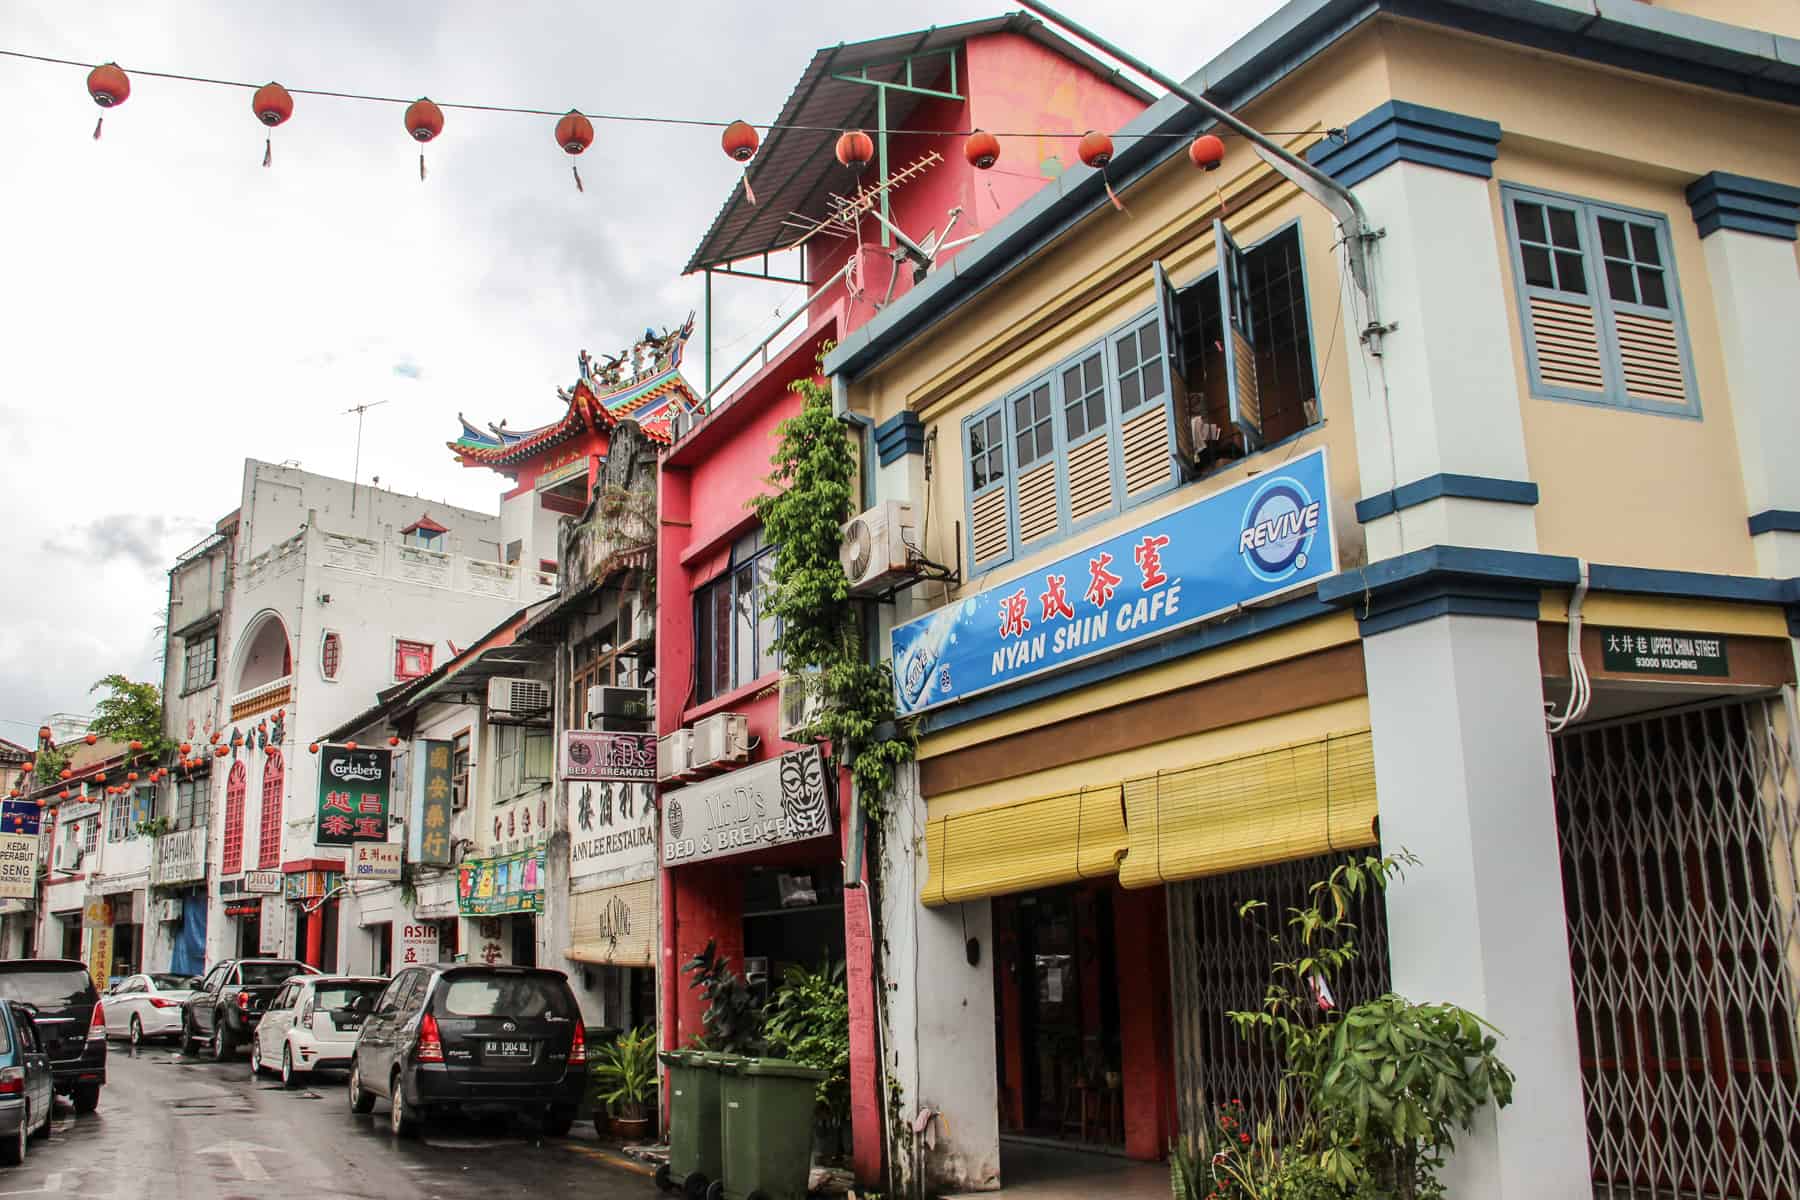 Colonial and Chinese style architecture mix on a street front in Kuching, where buildings are painted in yellow, blue and pink and decorated with Chinese lanterns